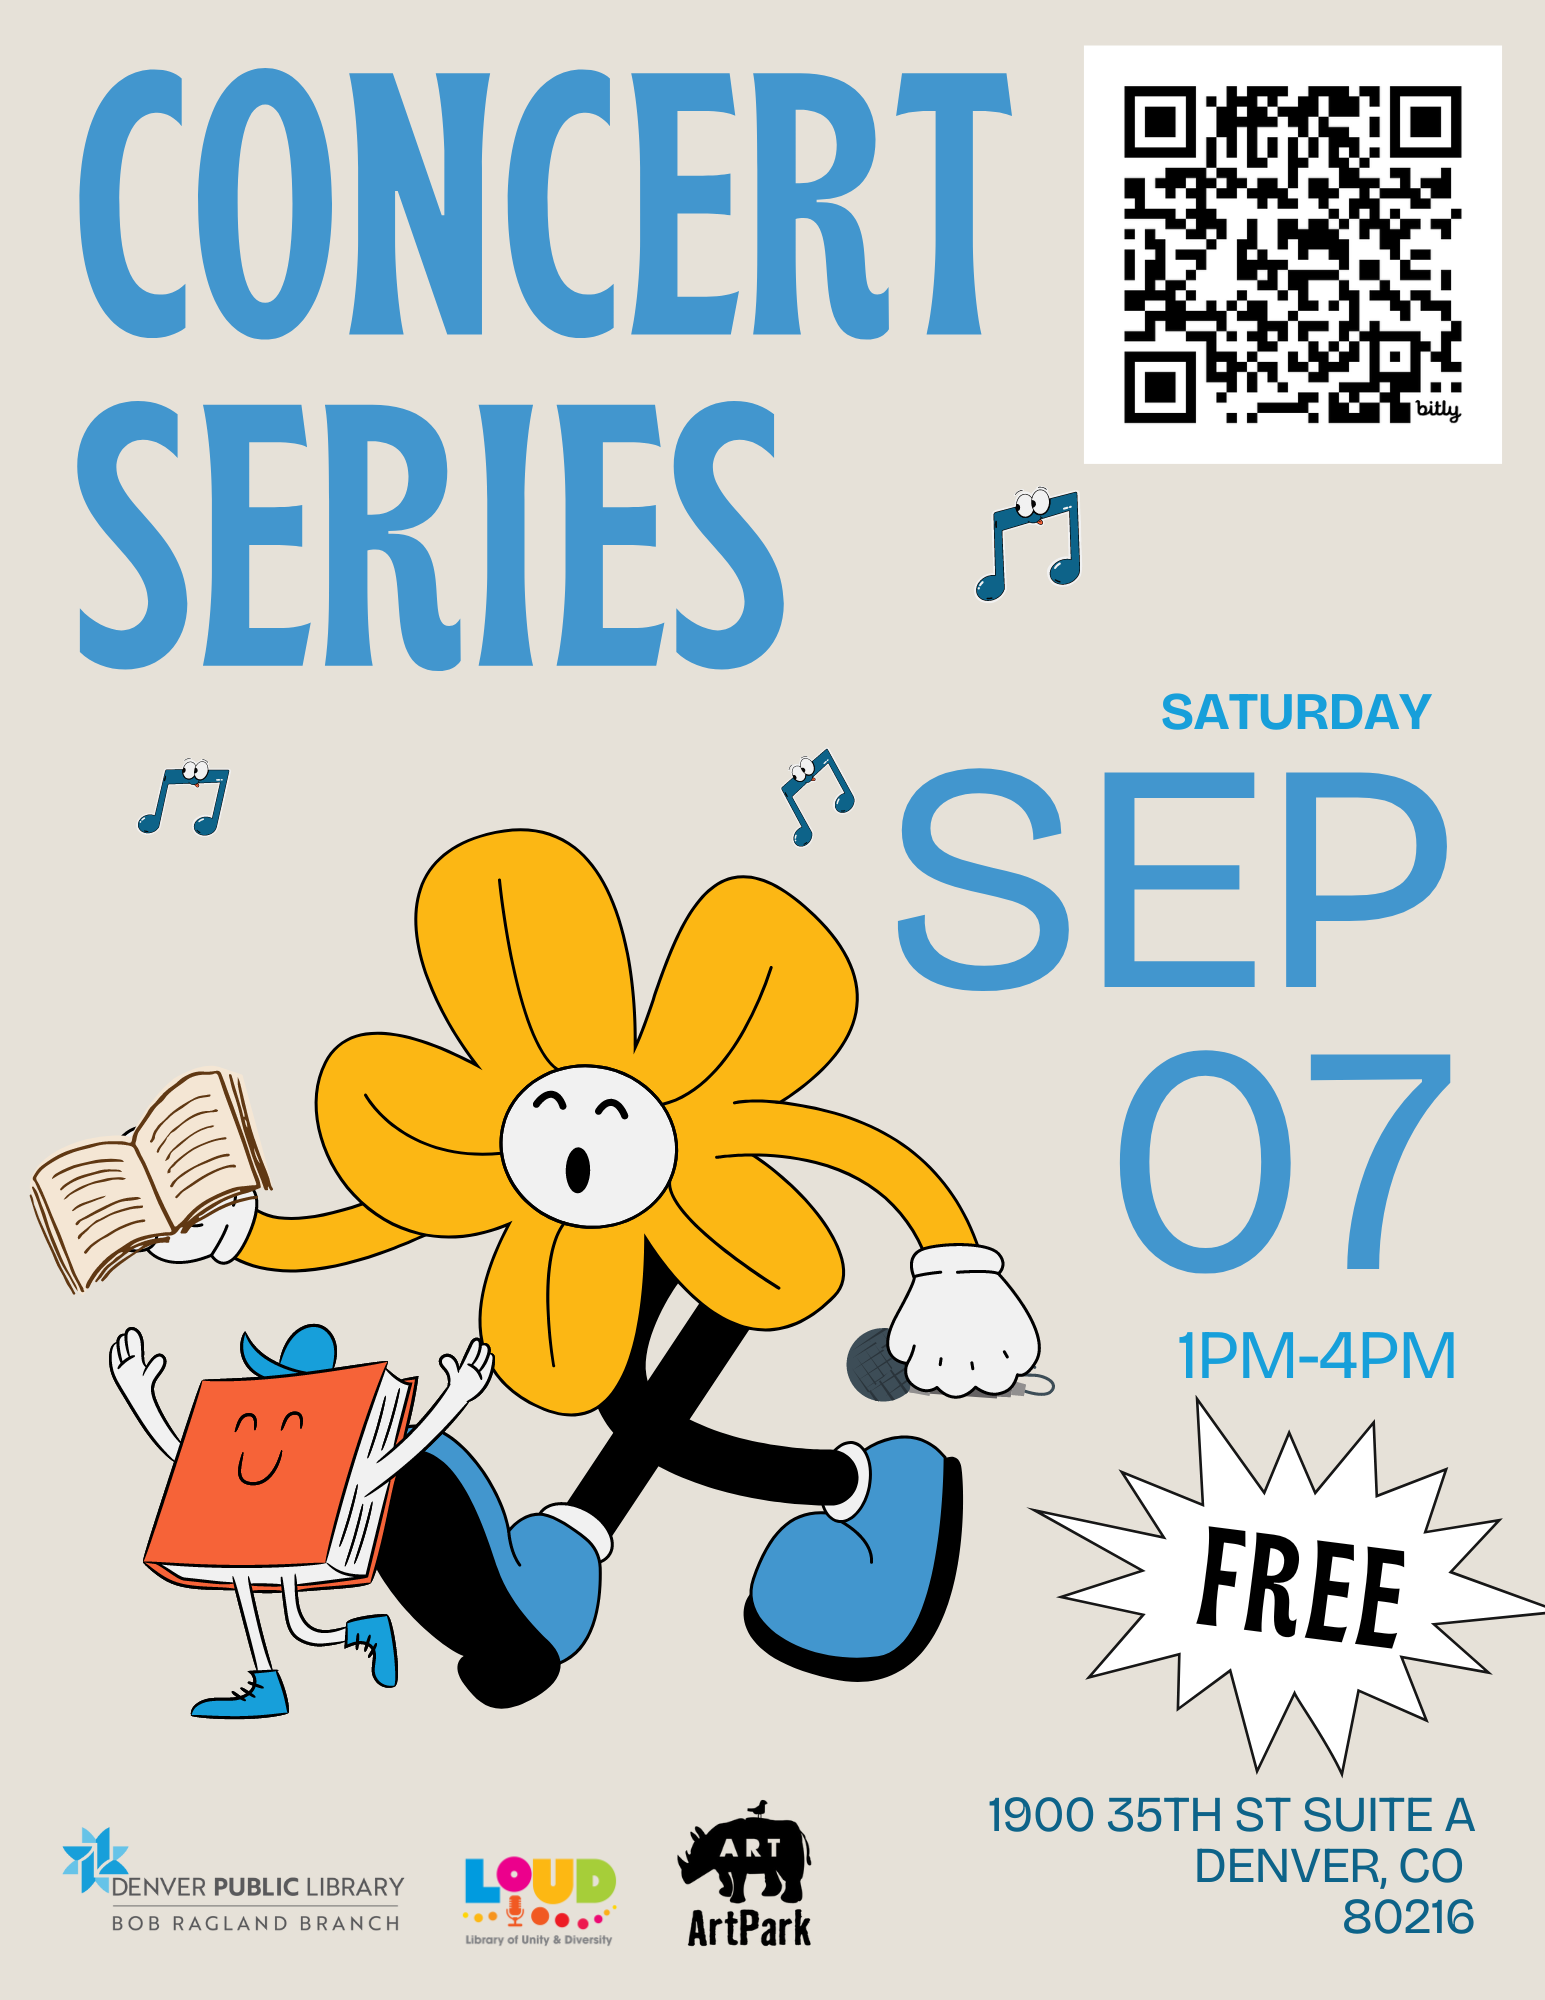 September Concert Series Flyer. Free event is 1-4PM 09/07/2024